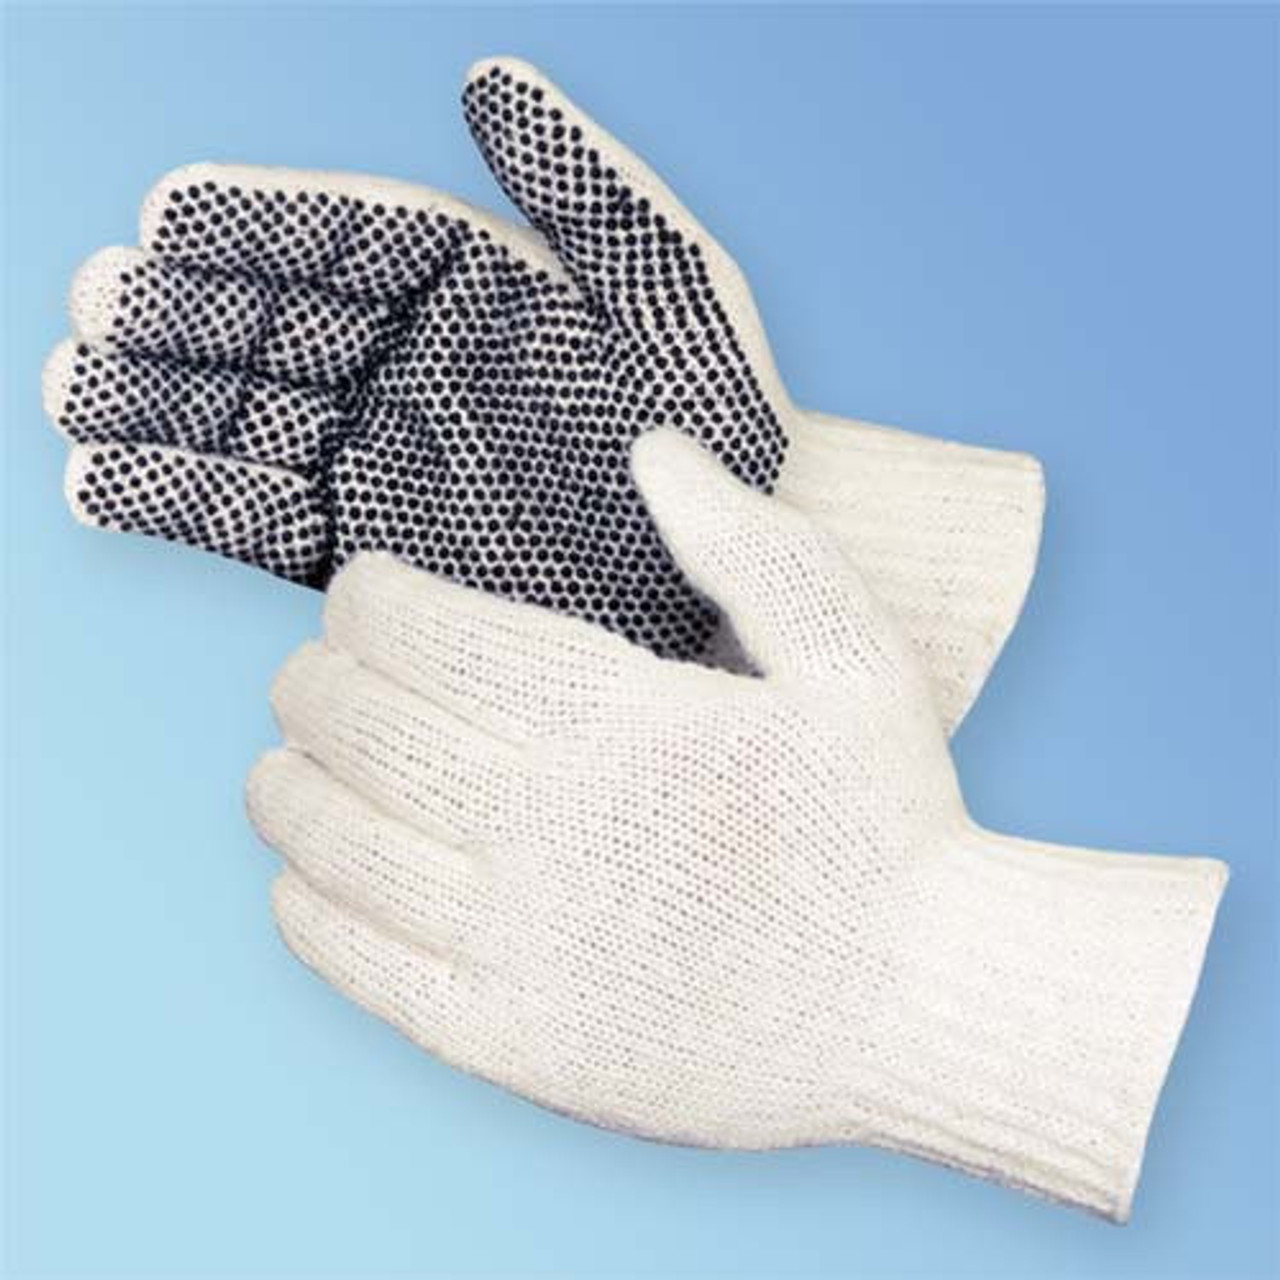 PVC Coated Cotton/Polyester Knit Work Double-Sided Dots Work Gloves Large -  DOT